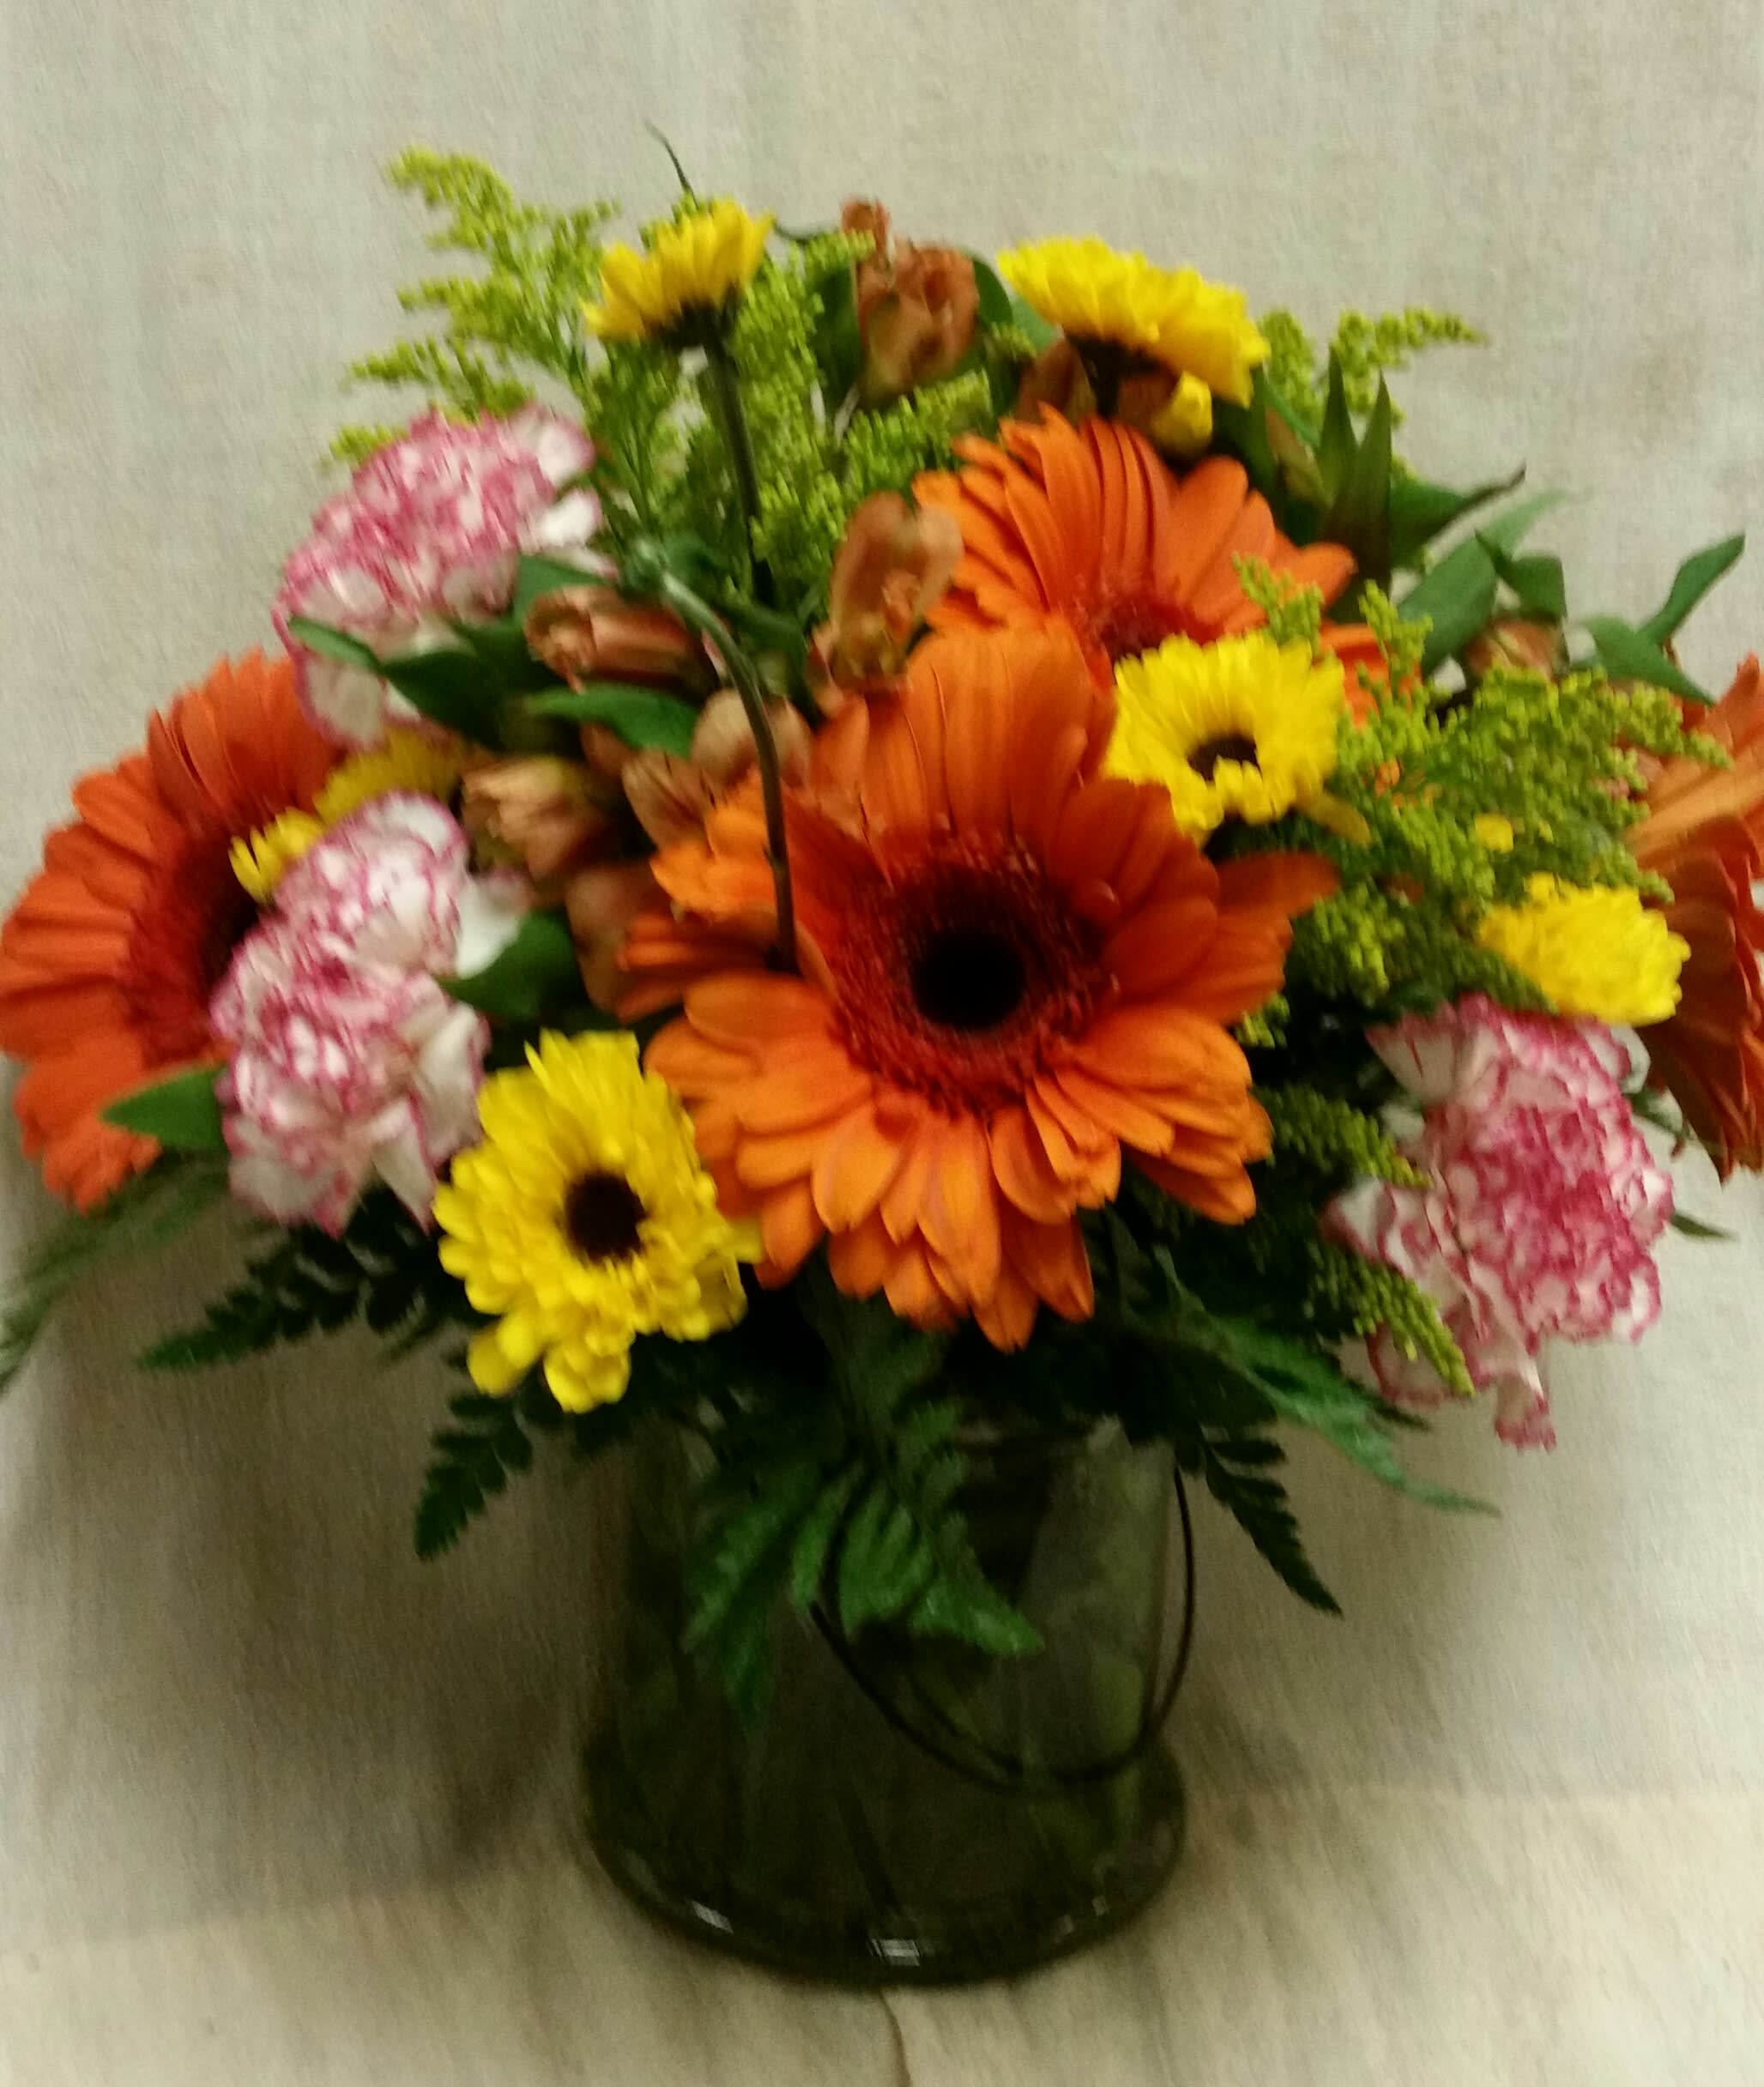 Cheerful Orange gerbera Daisies and More - Clear Cylinder vase with bright and cheerful flowers to include gerbera daises, carnations, pom poms and more!